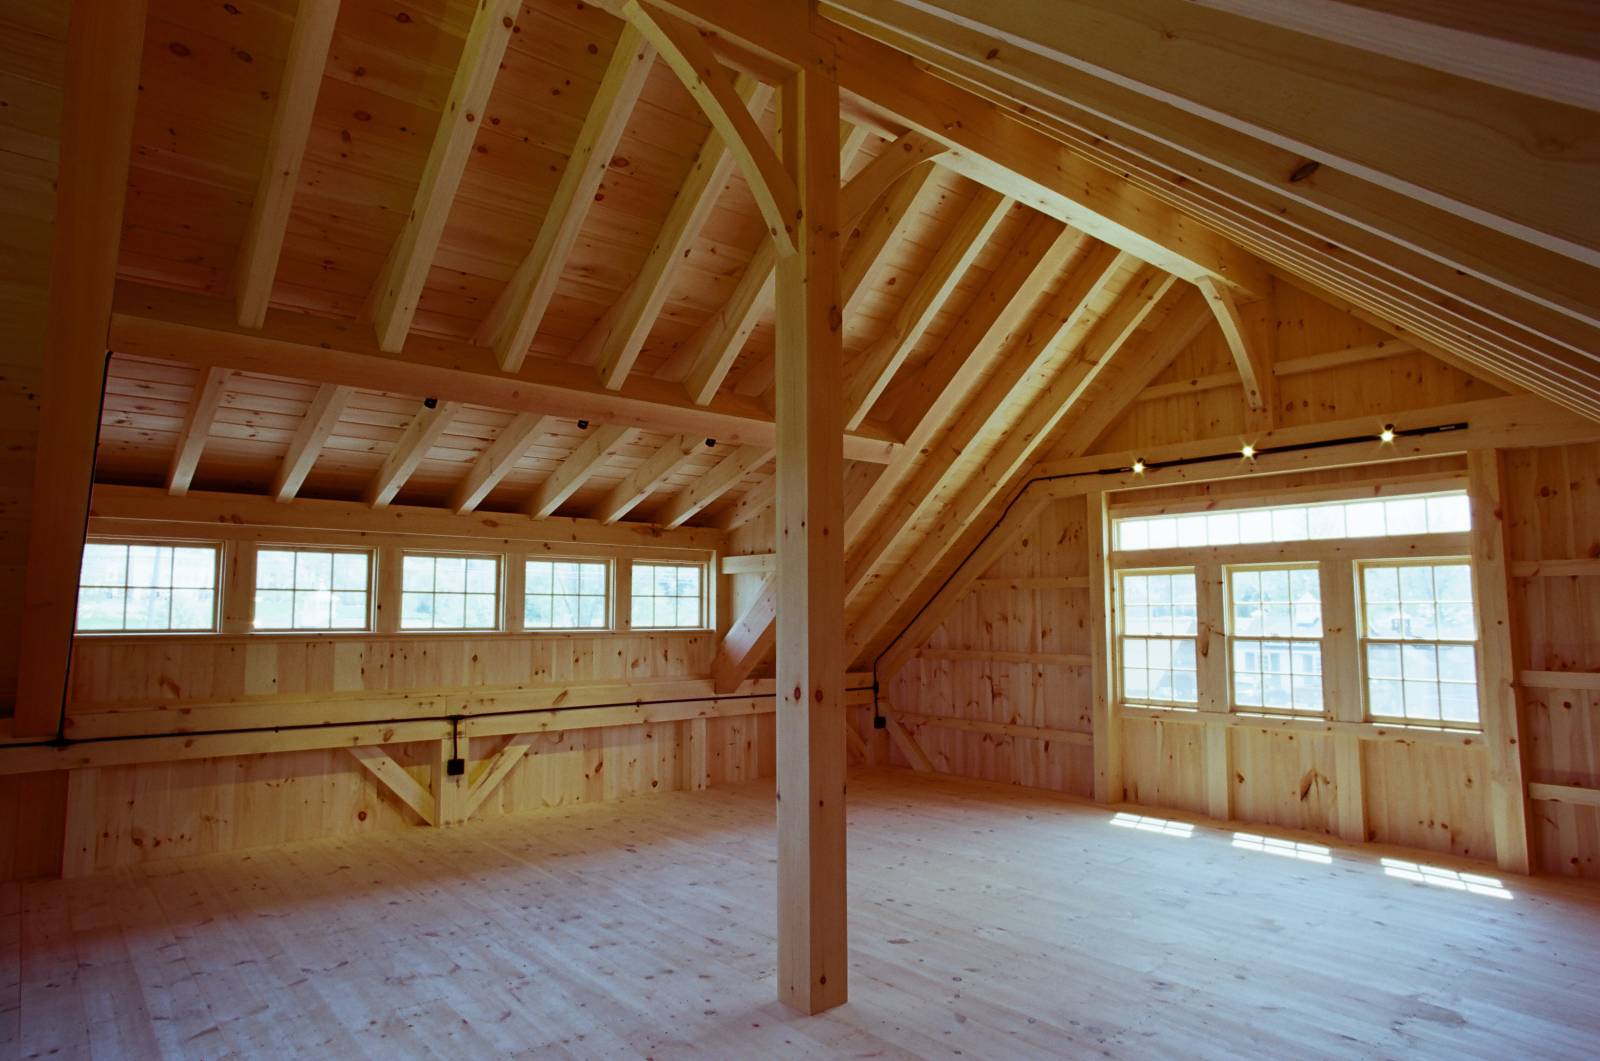 Carriage Barn second floor with structural ridge beam